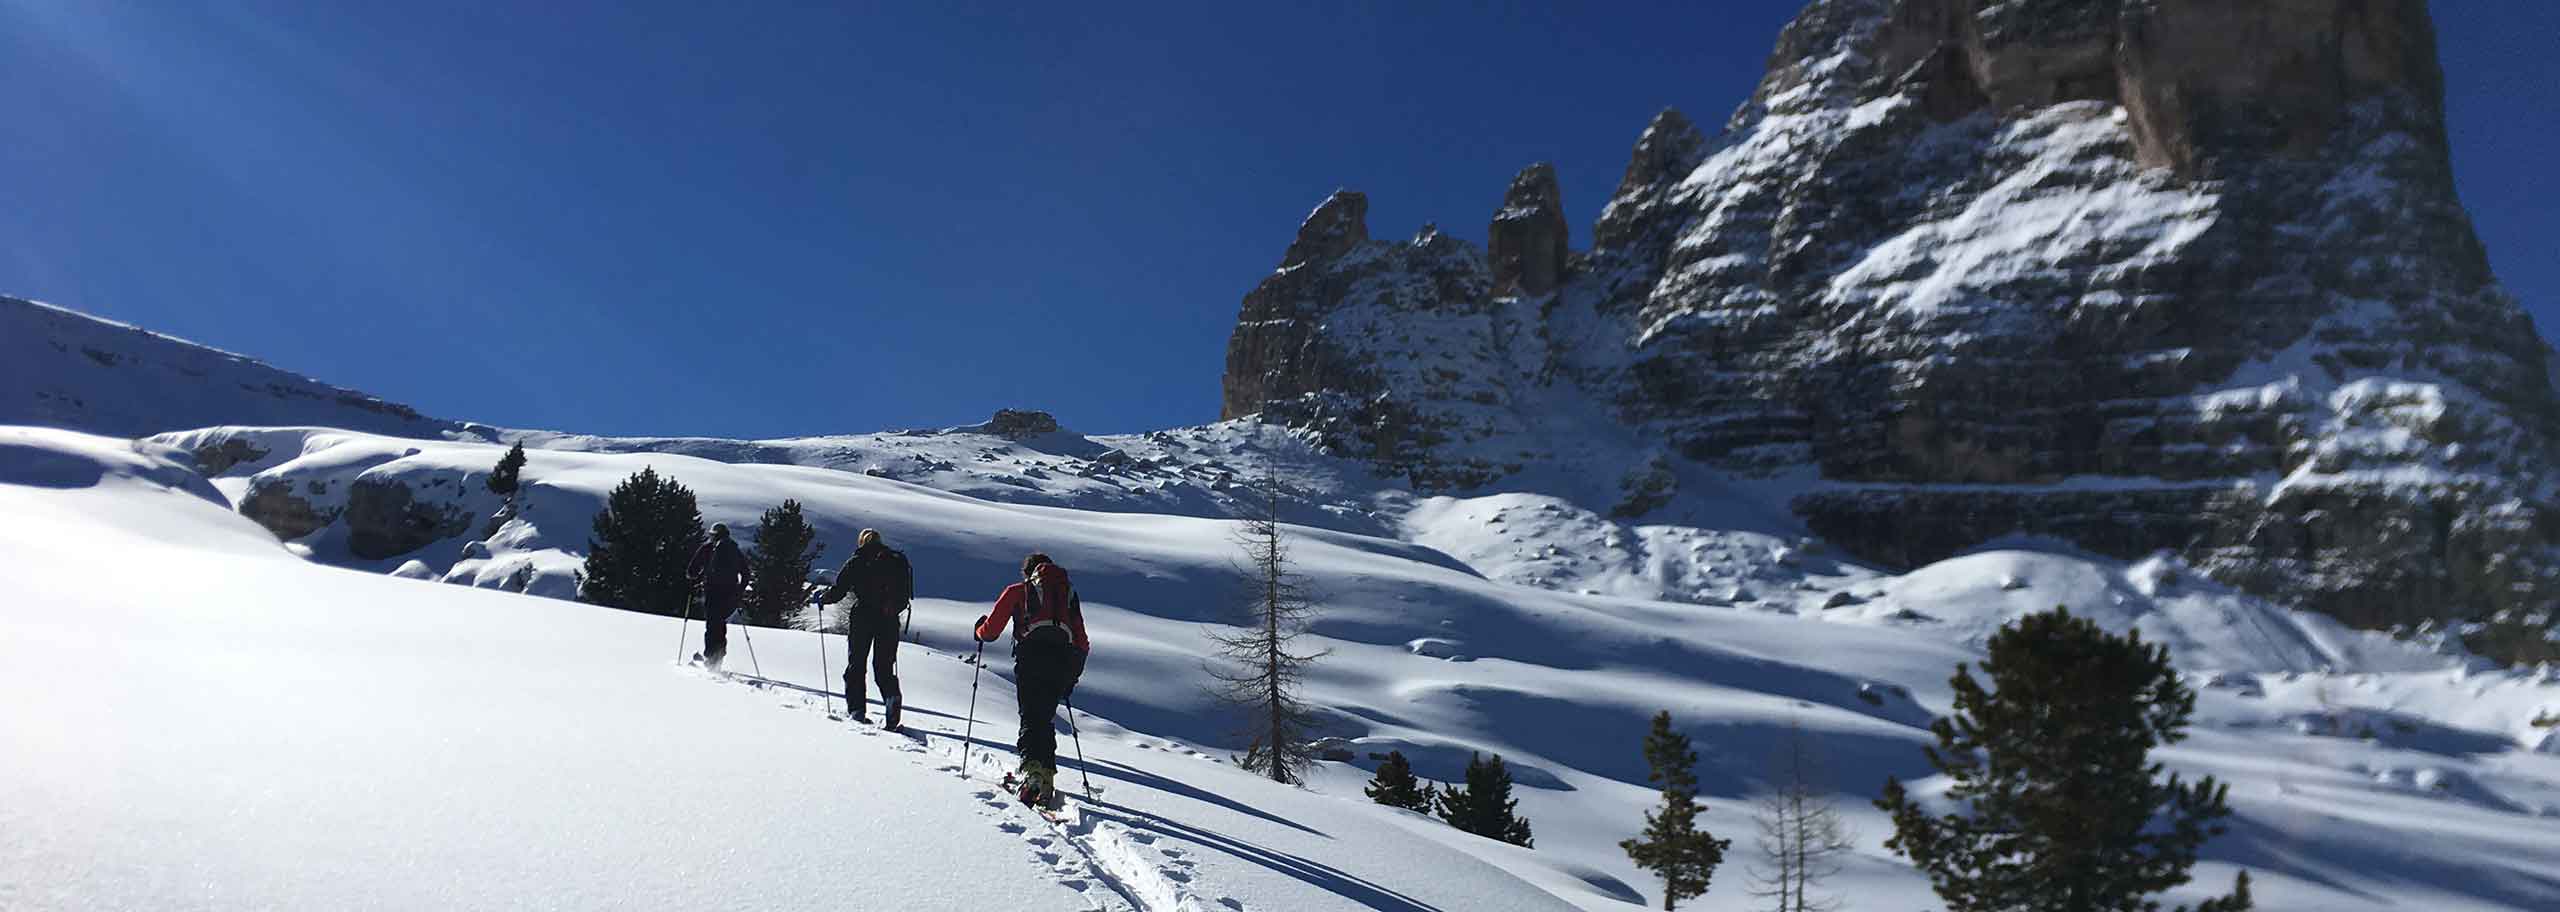 Ski Mountaineering with a Mountain Guide in Cortina d'Ampezzo